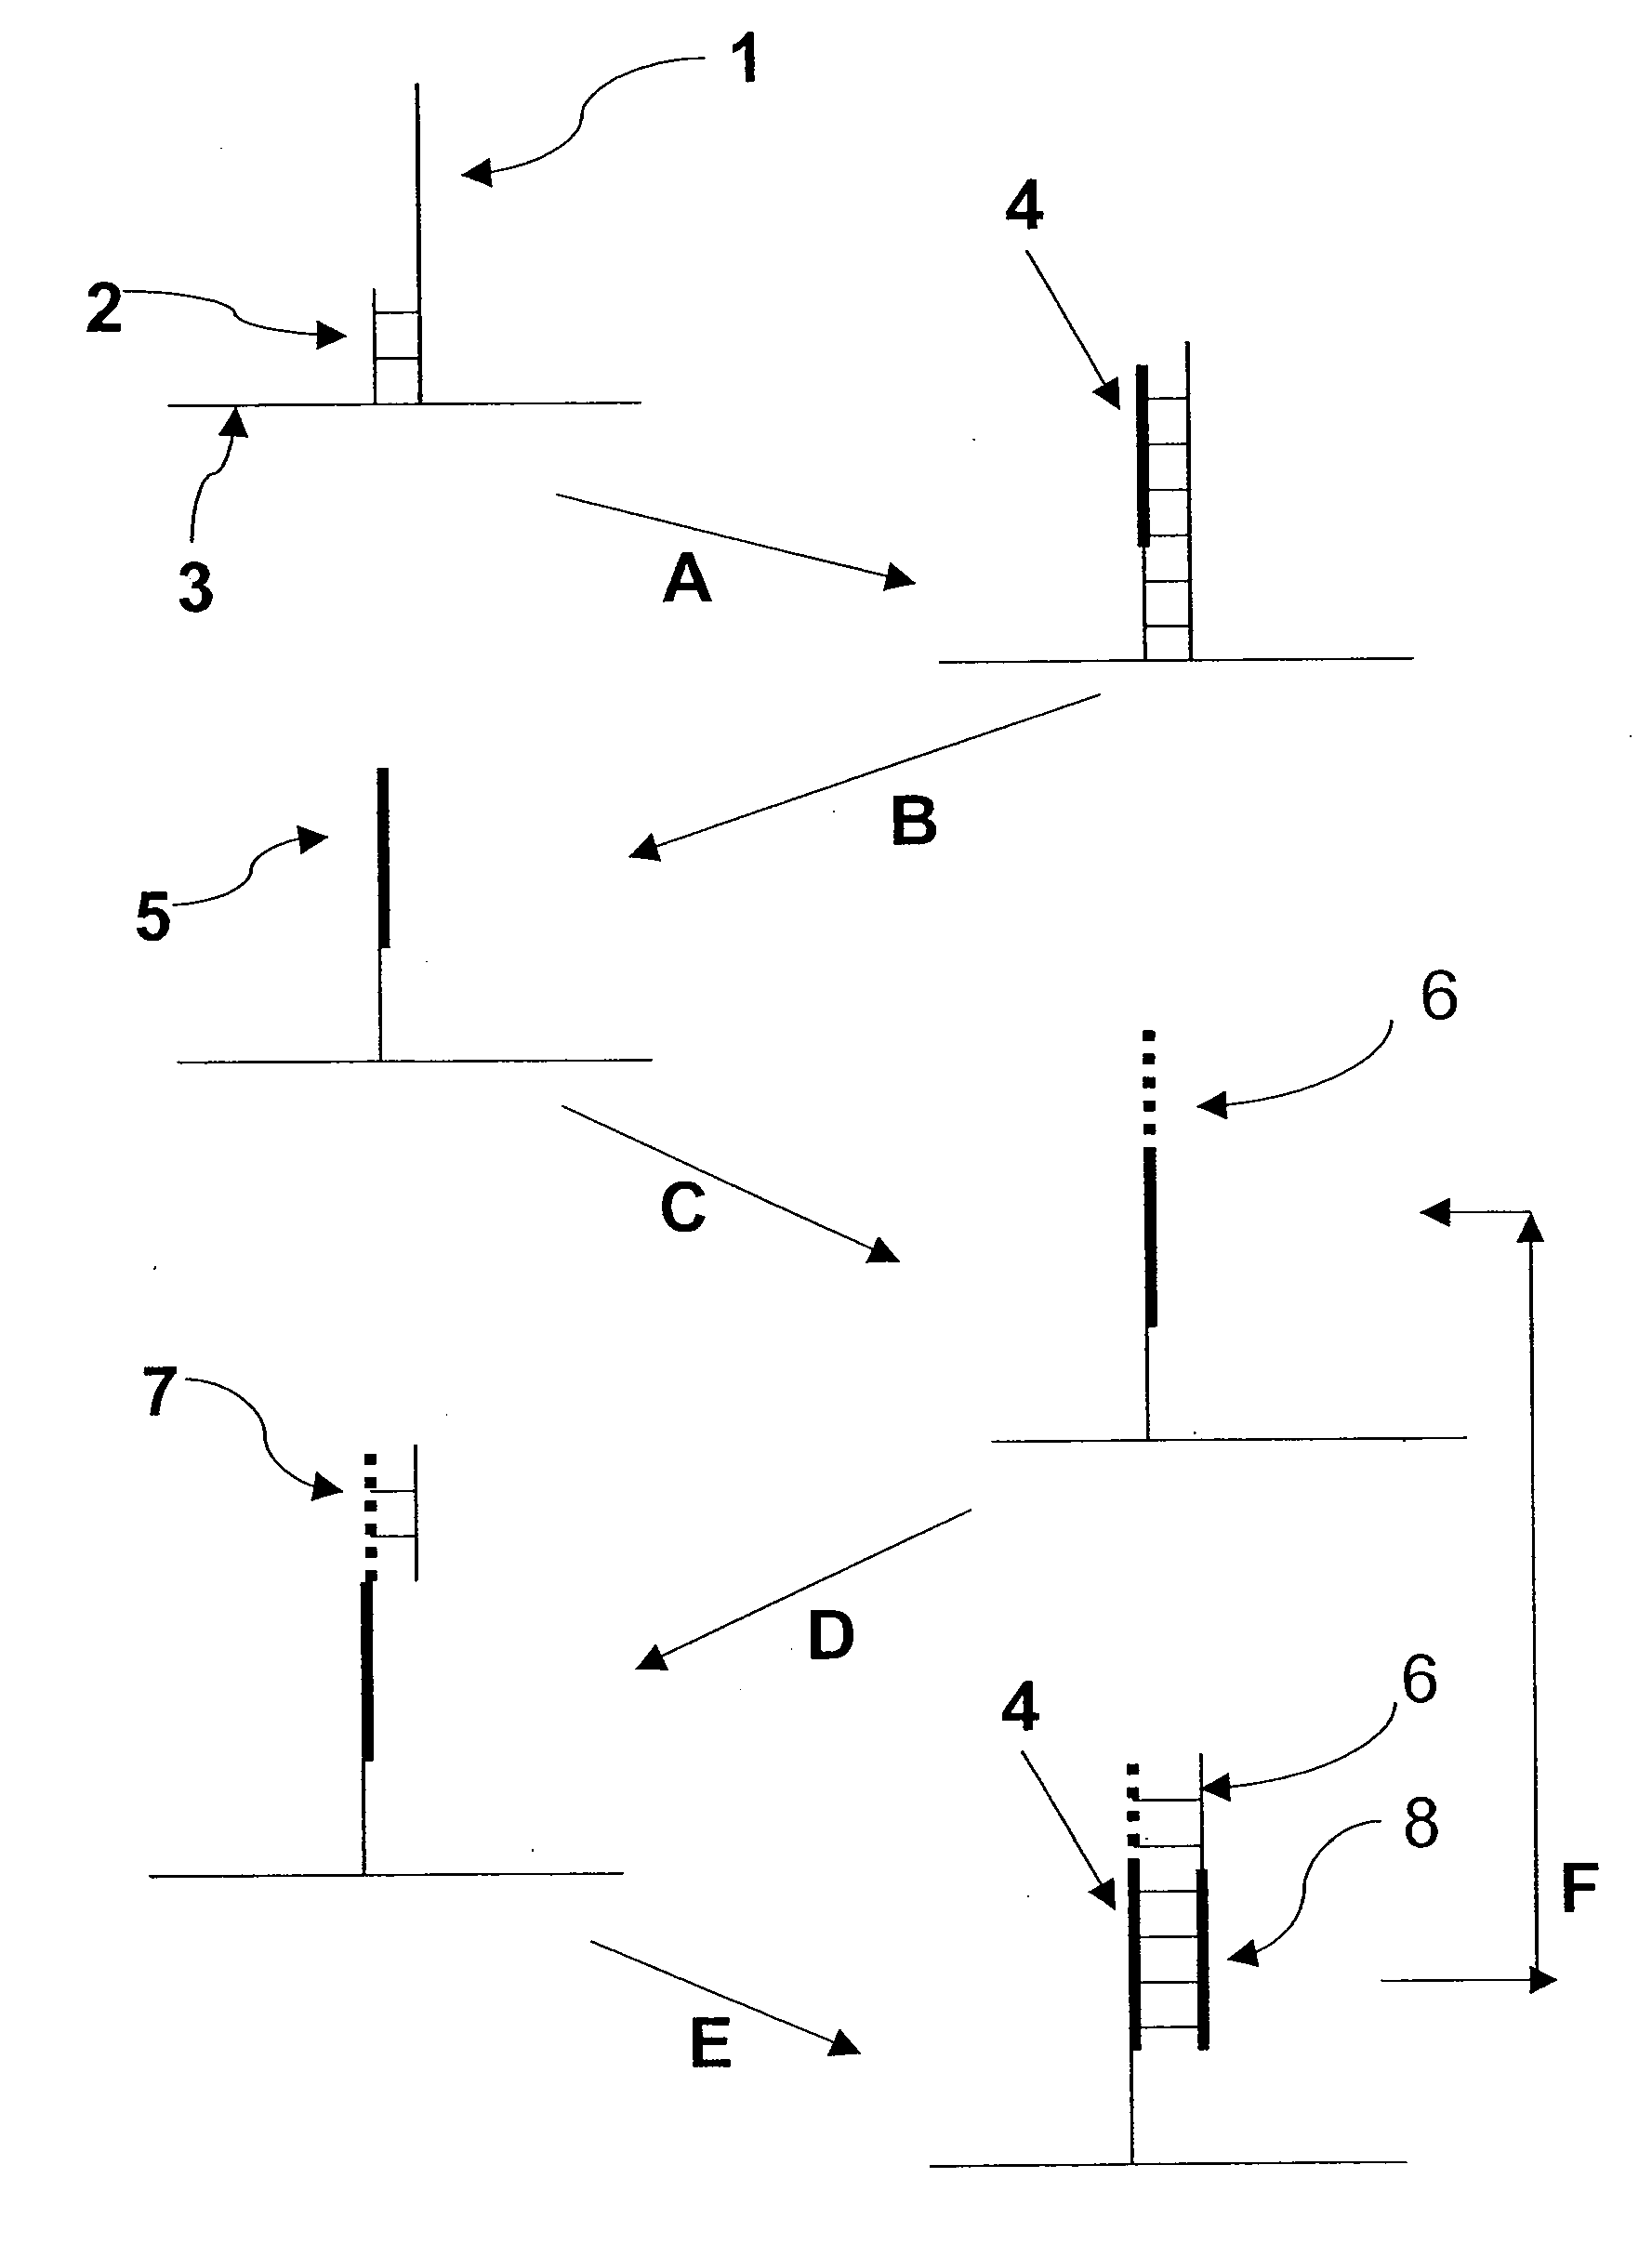 Molecules and methods for nucleic acid sequencing